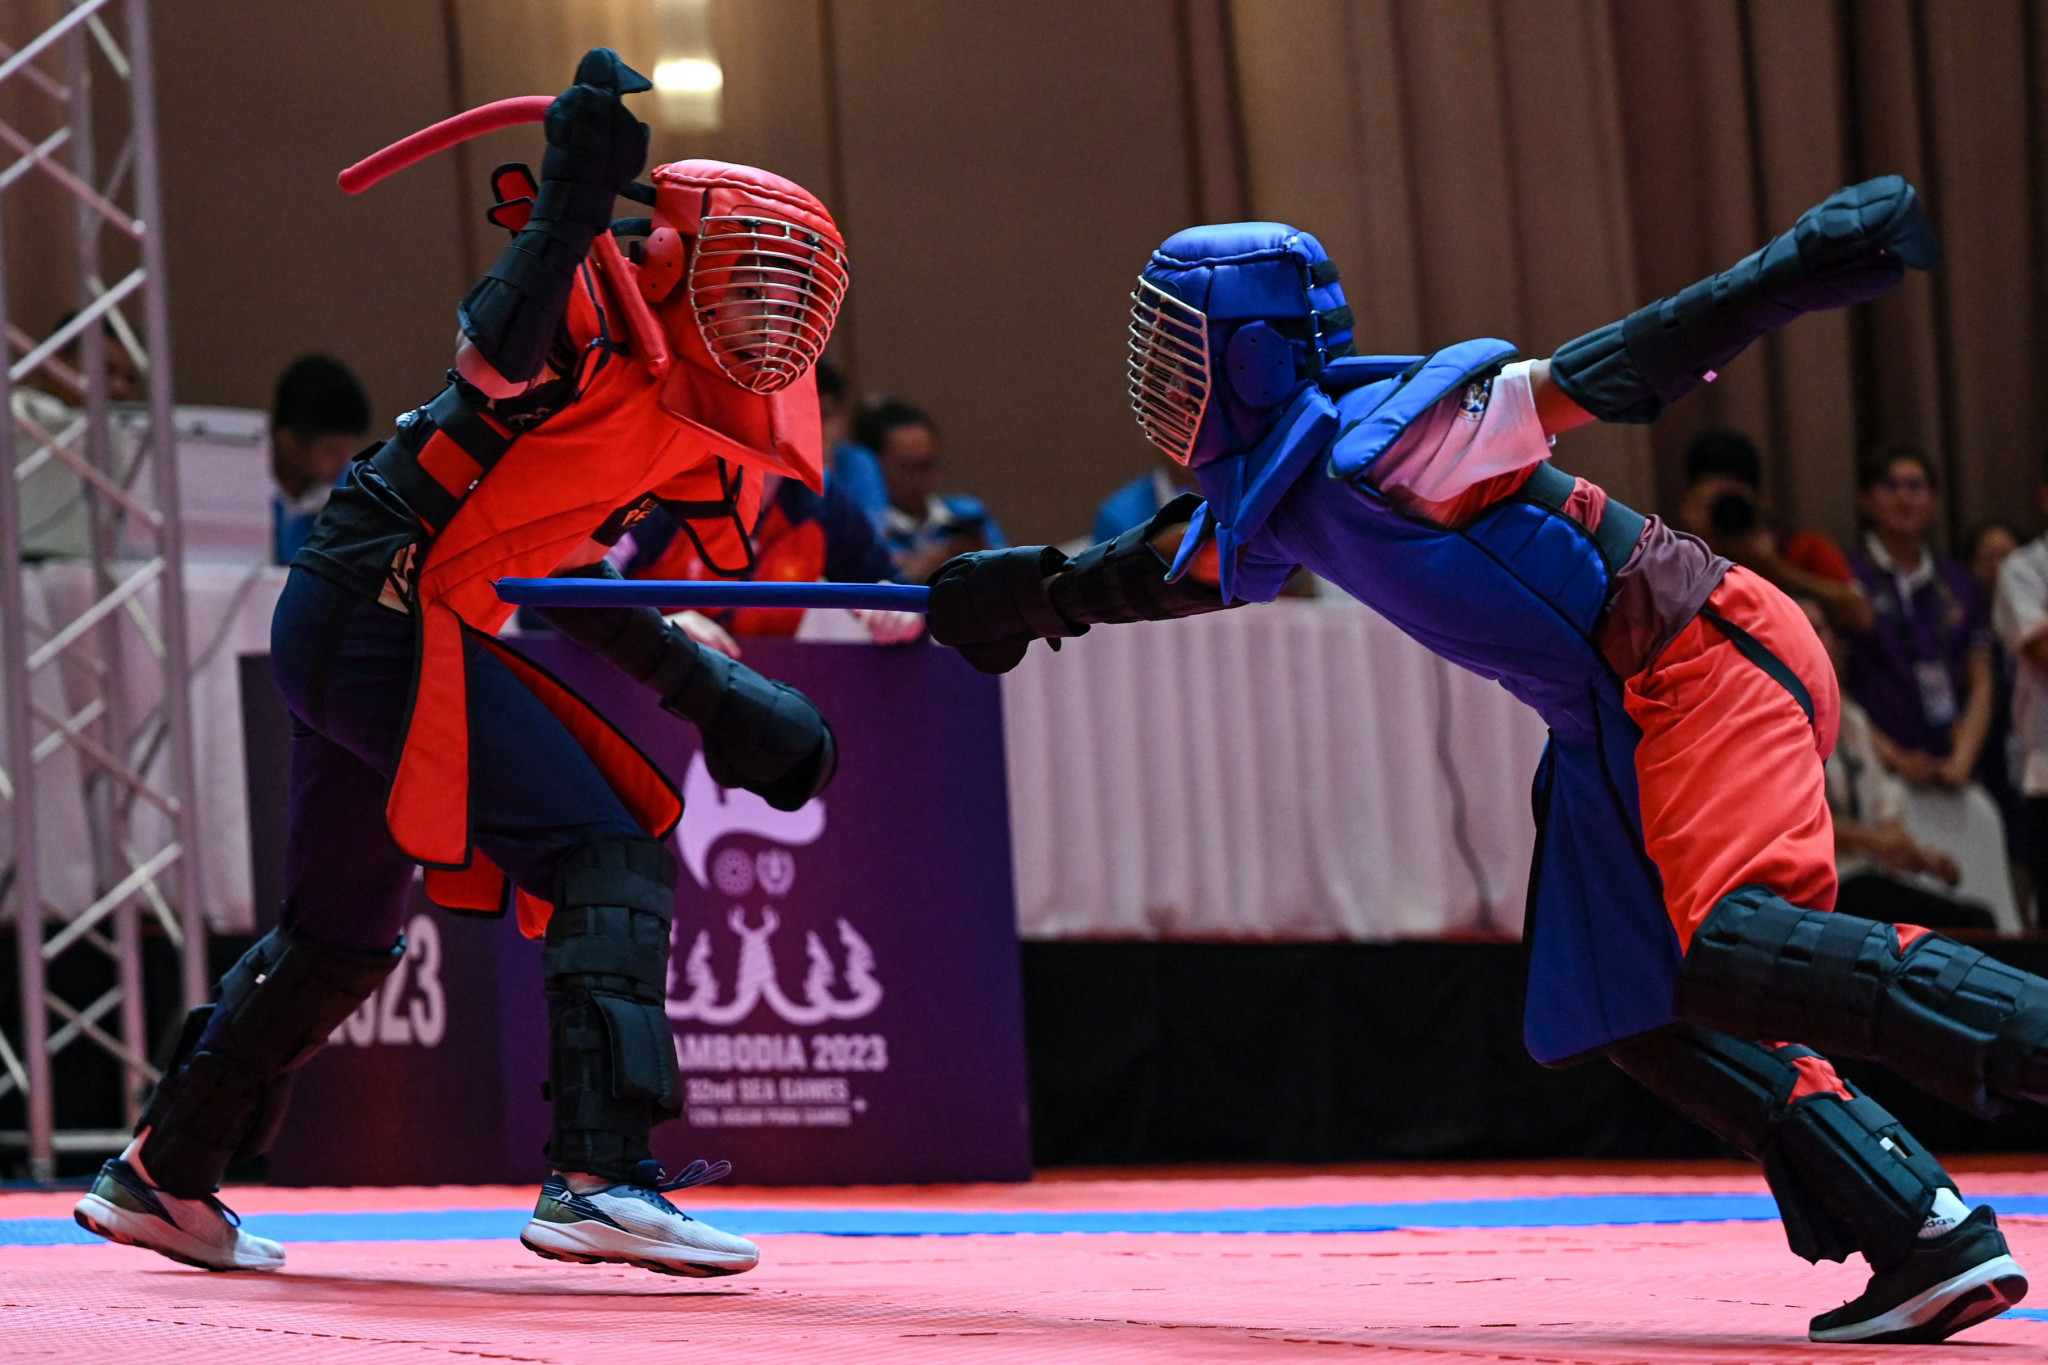 Competition continued in arnis, a stick-based martial art ©Getty Images